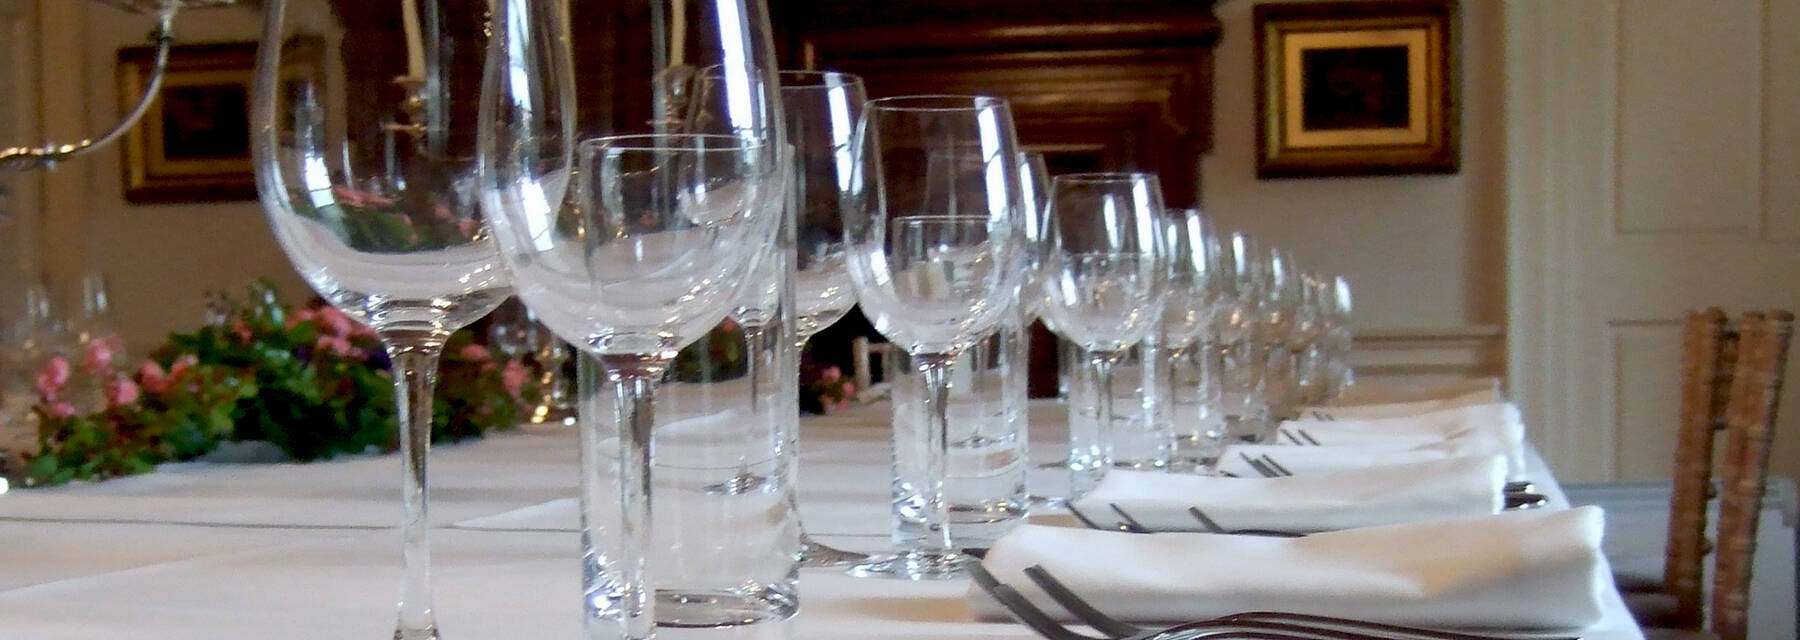 Table set with wine glasses